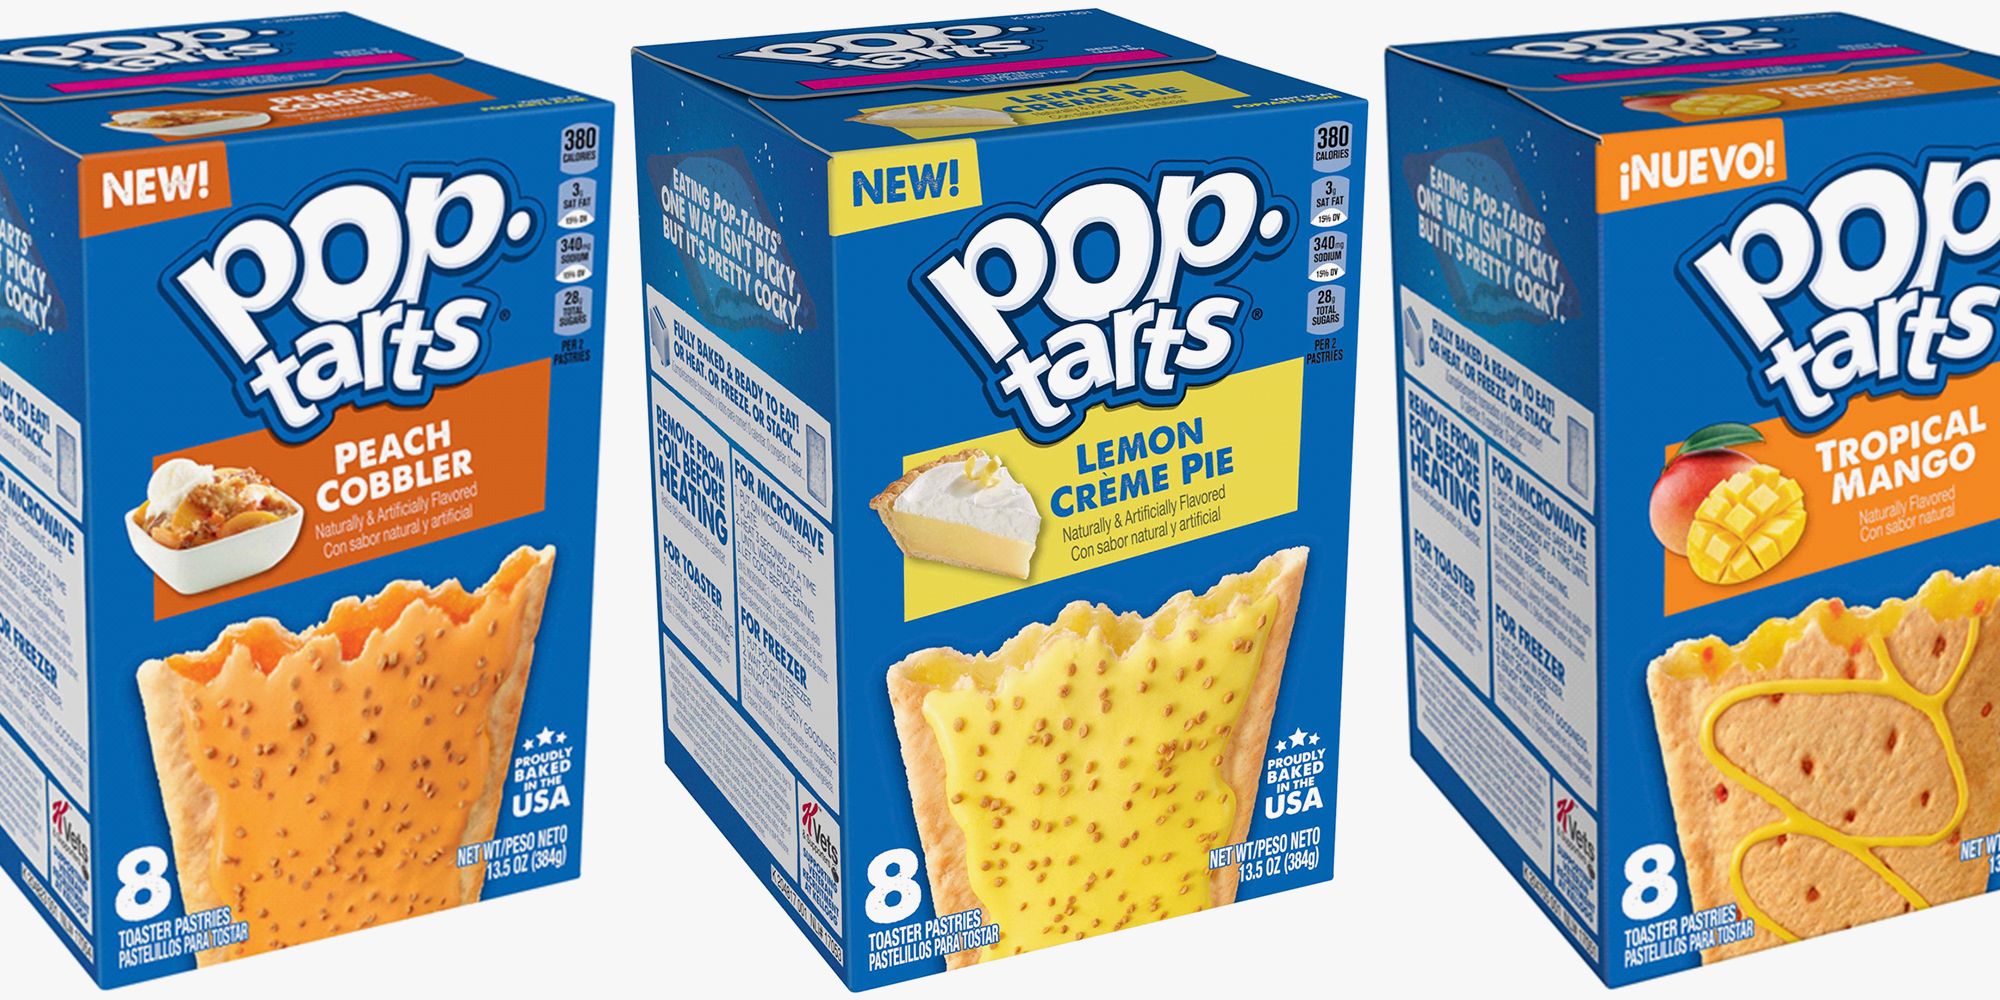 Pop-Tarts Has Three New Flavors Have Us Drooling for Summer Pastries